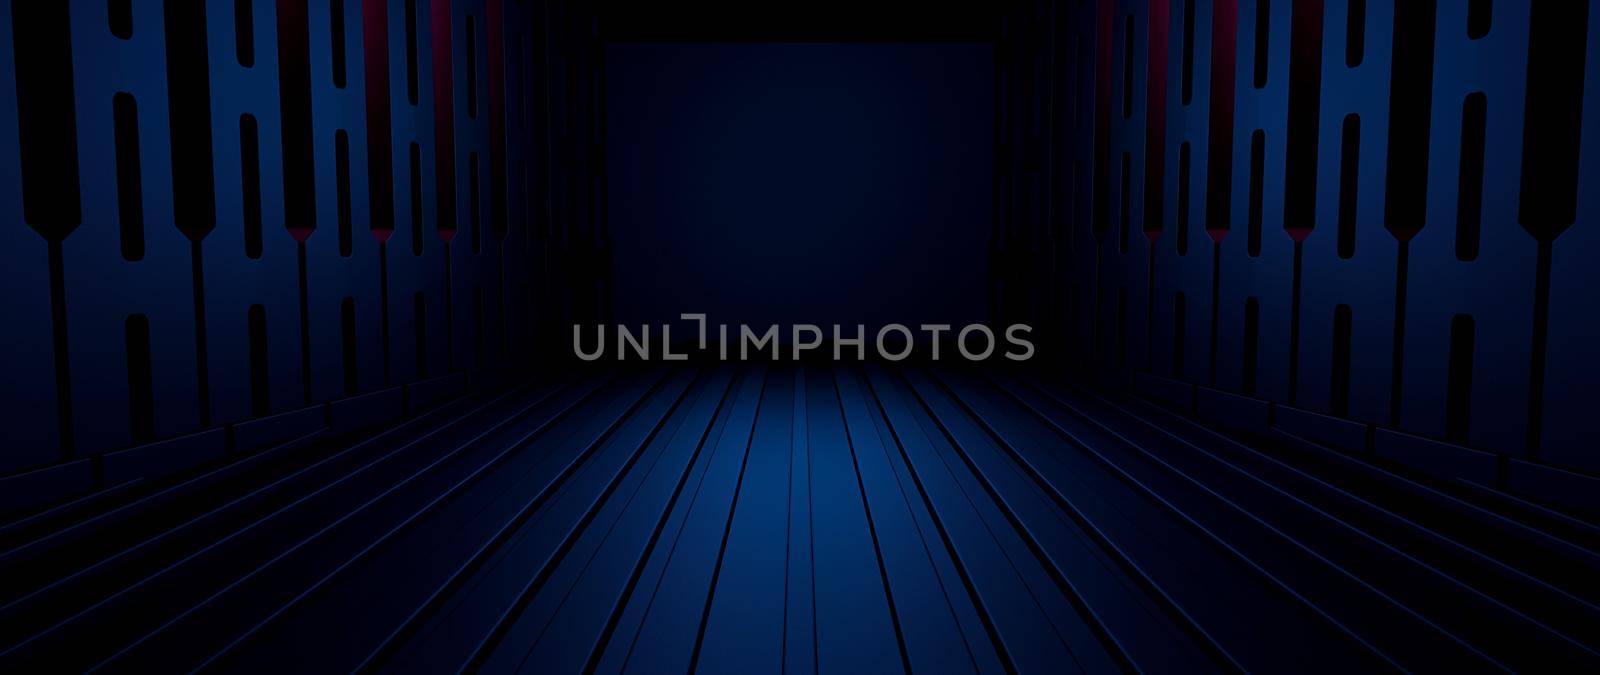 Abstract Scifi Grungy Reflective Metal Underground Tunnel Room Dimmed Black Background For Product Backgrounds Presentation 3D Rendering by yay_lmrb